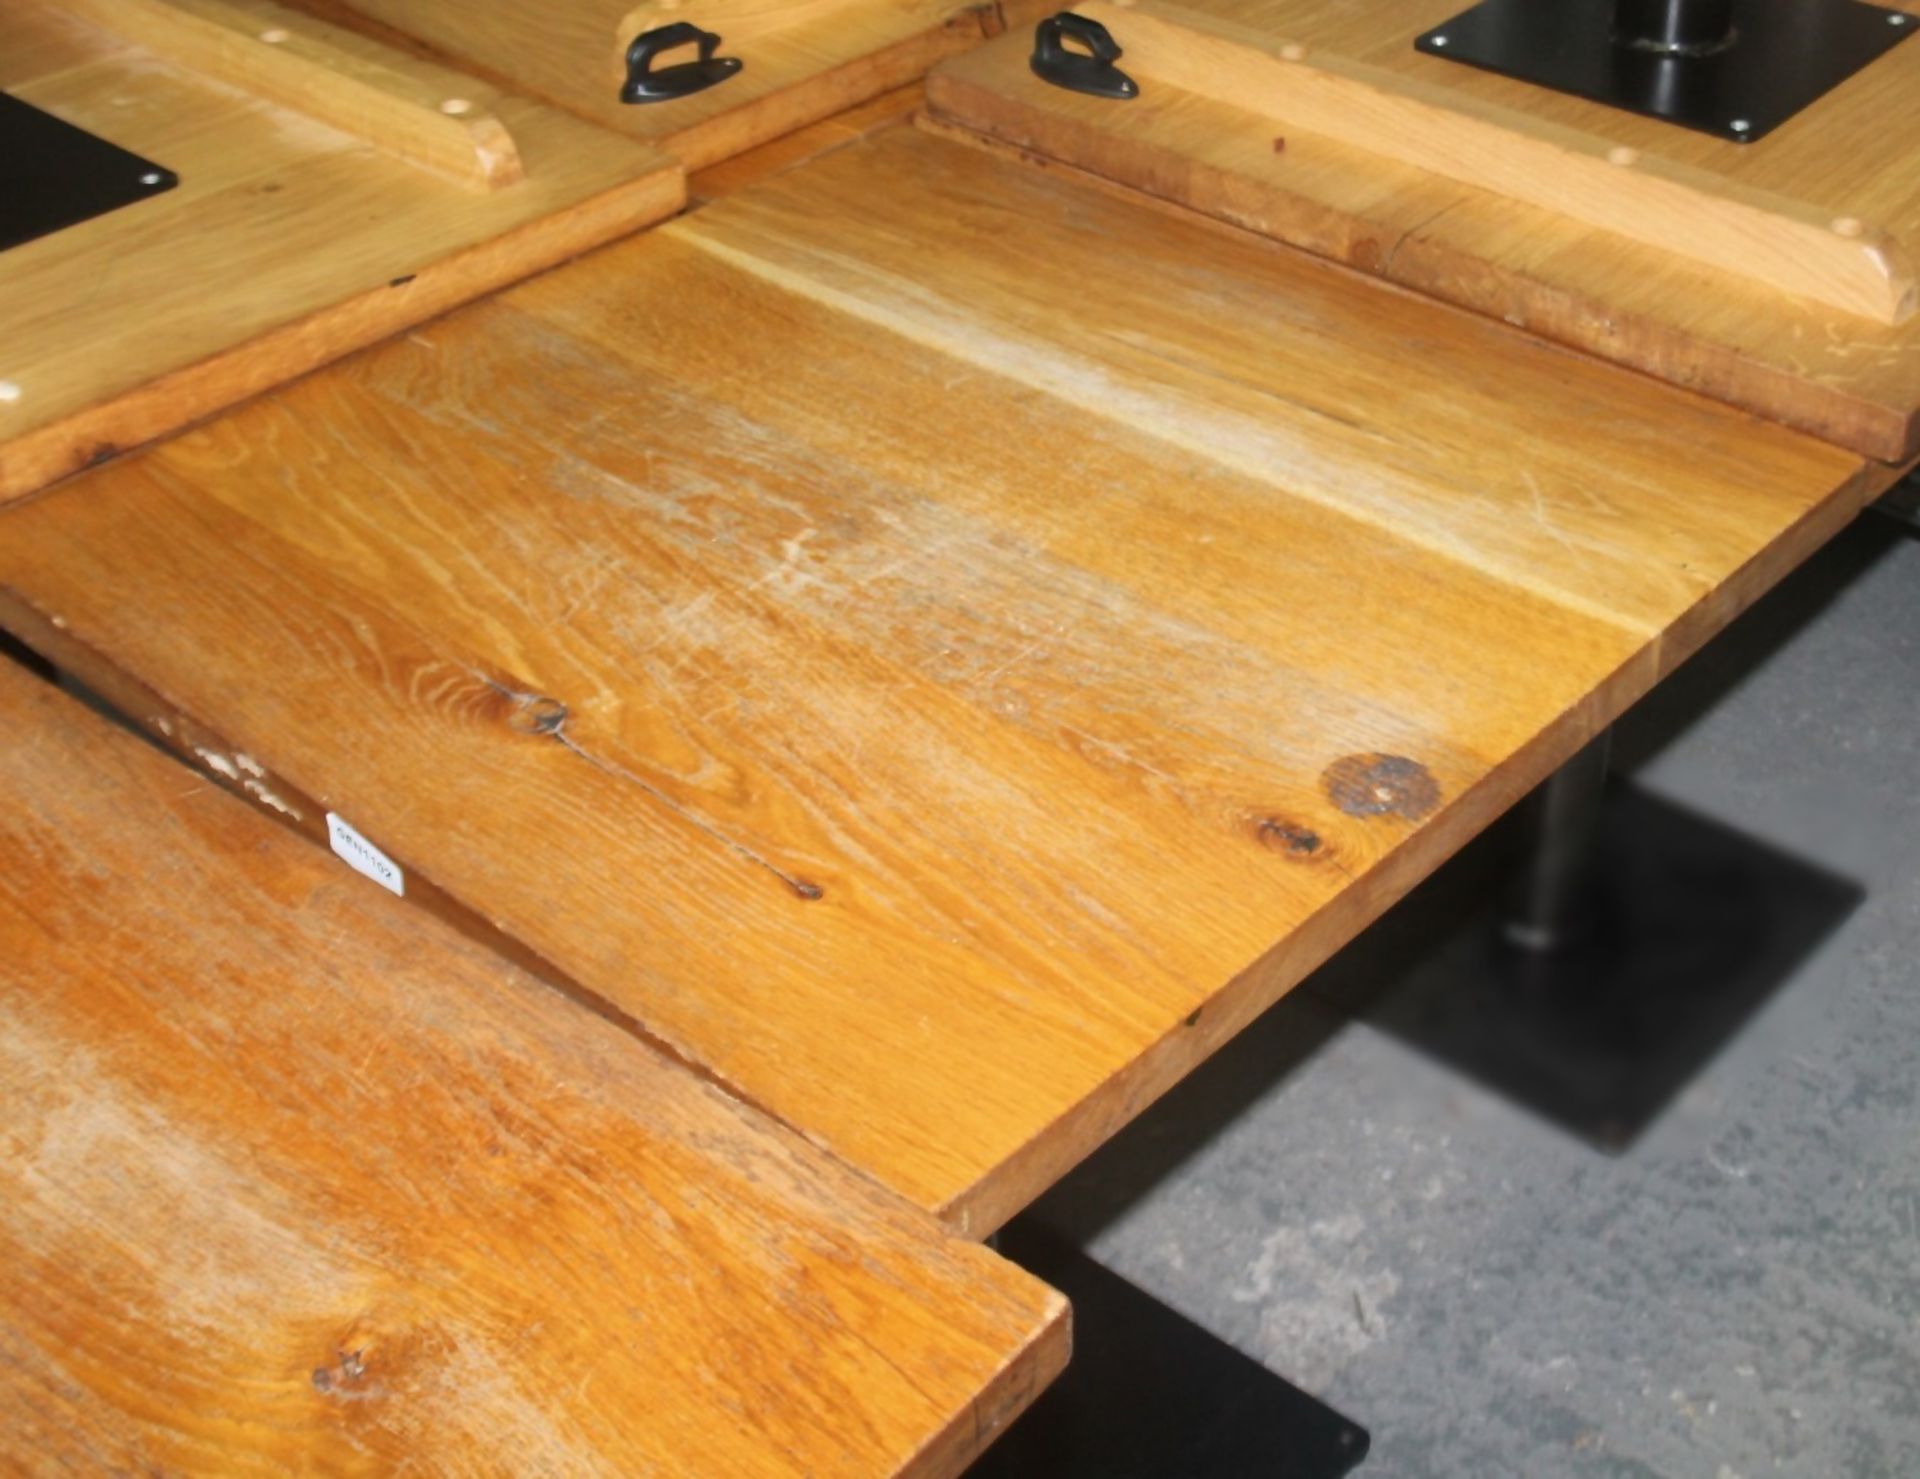 4 x Solid Oak Restaurant Dining Tables - Natural Rustic Knotty Oak Tops With Black Cast Iron Bases - Image 8 of 8